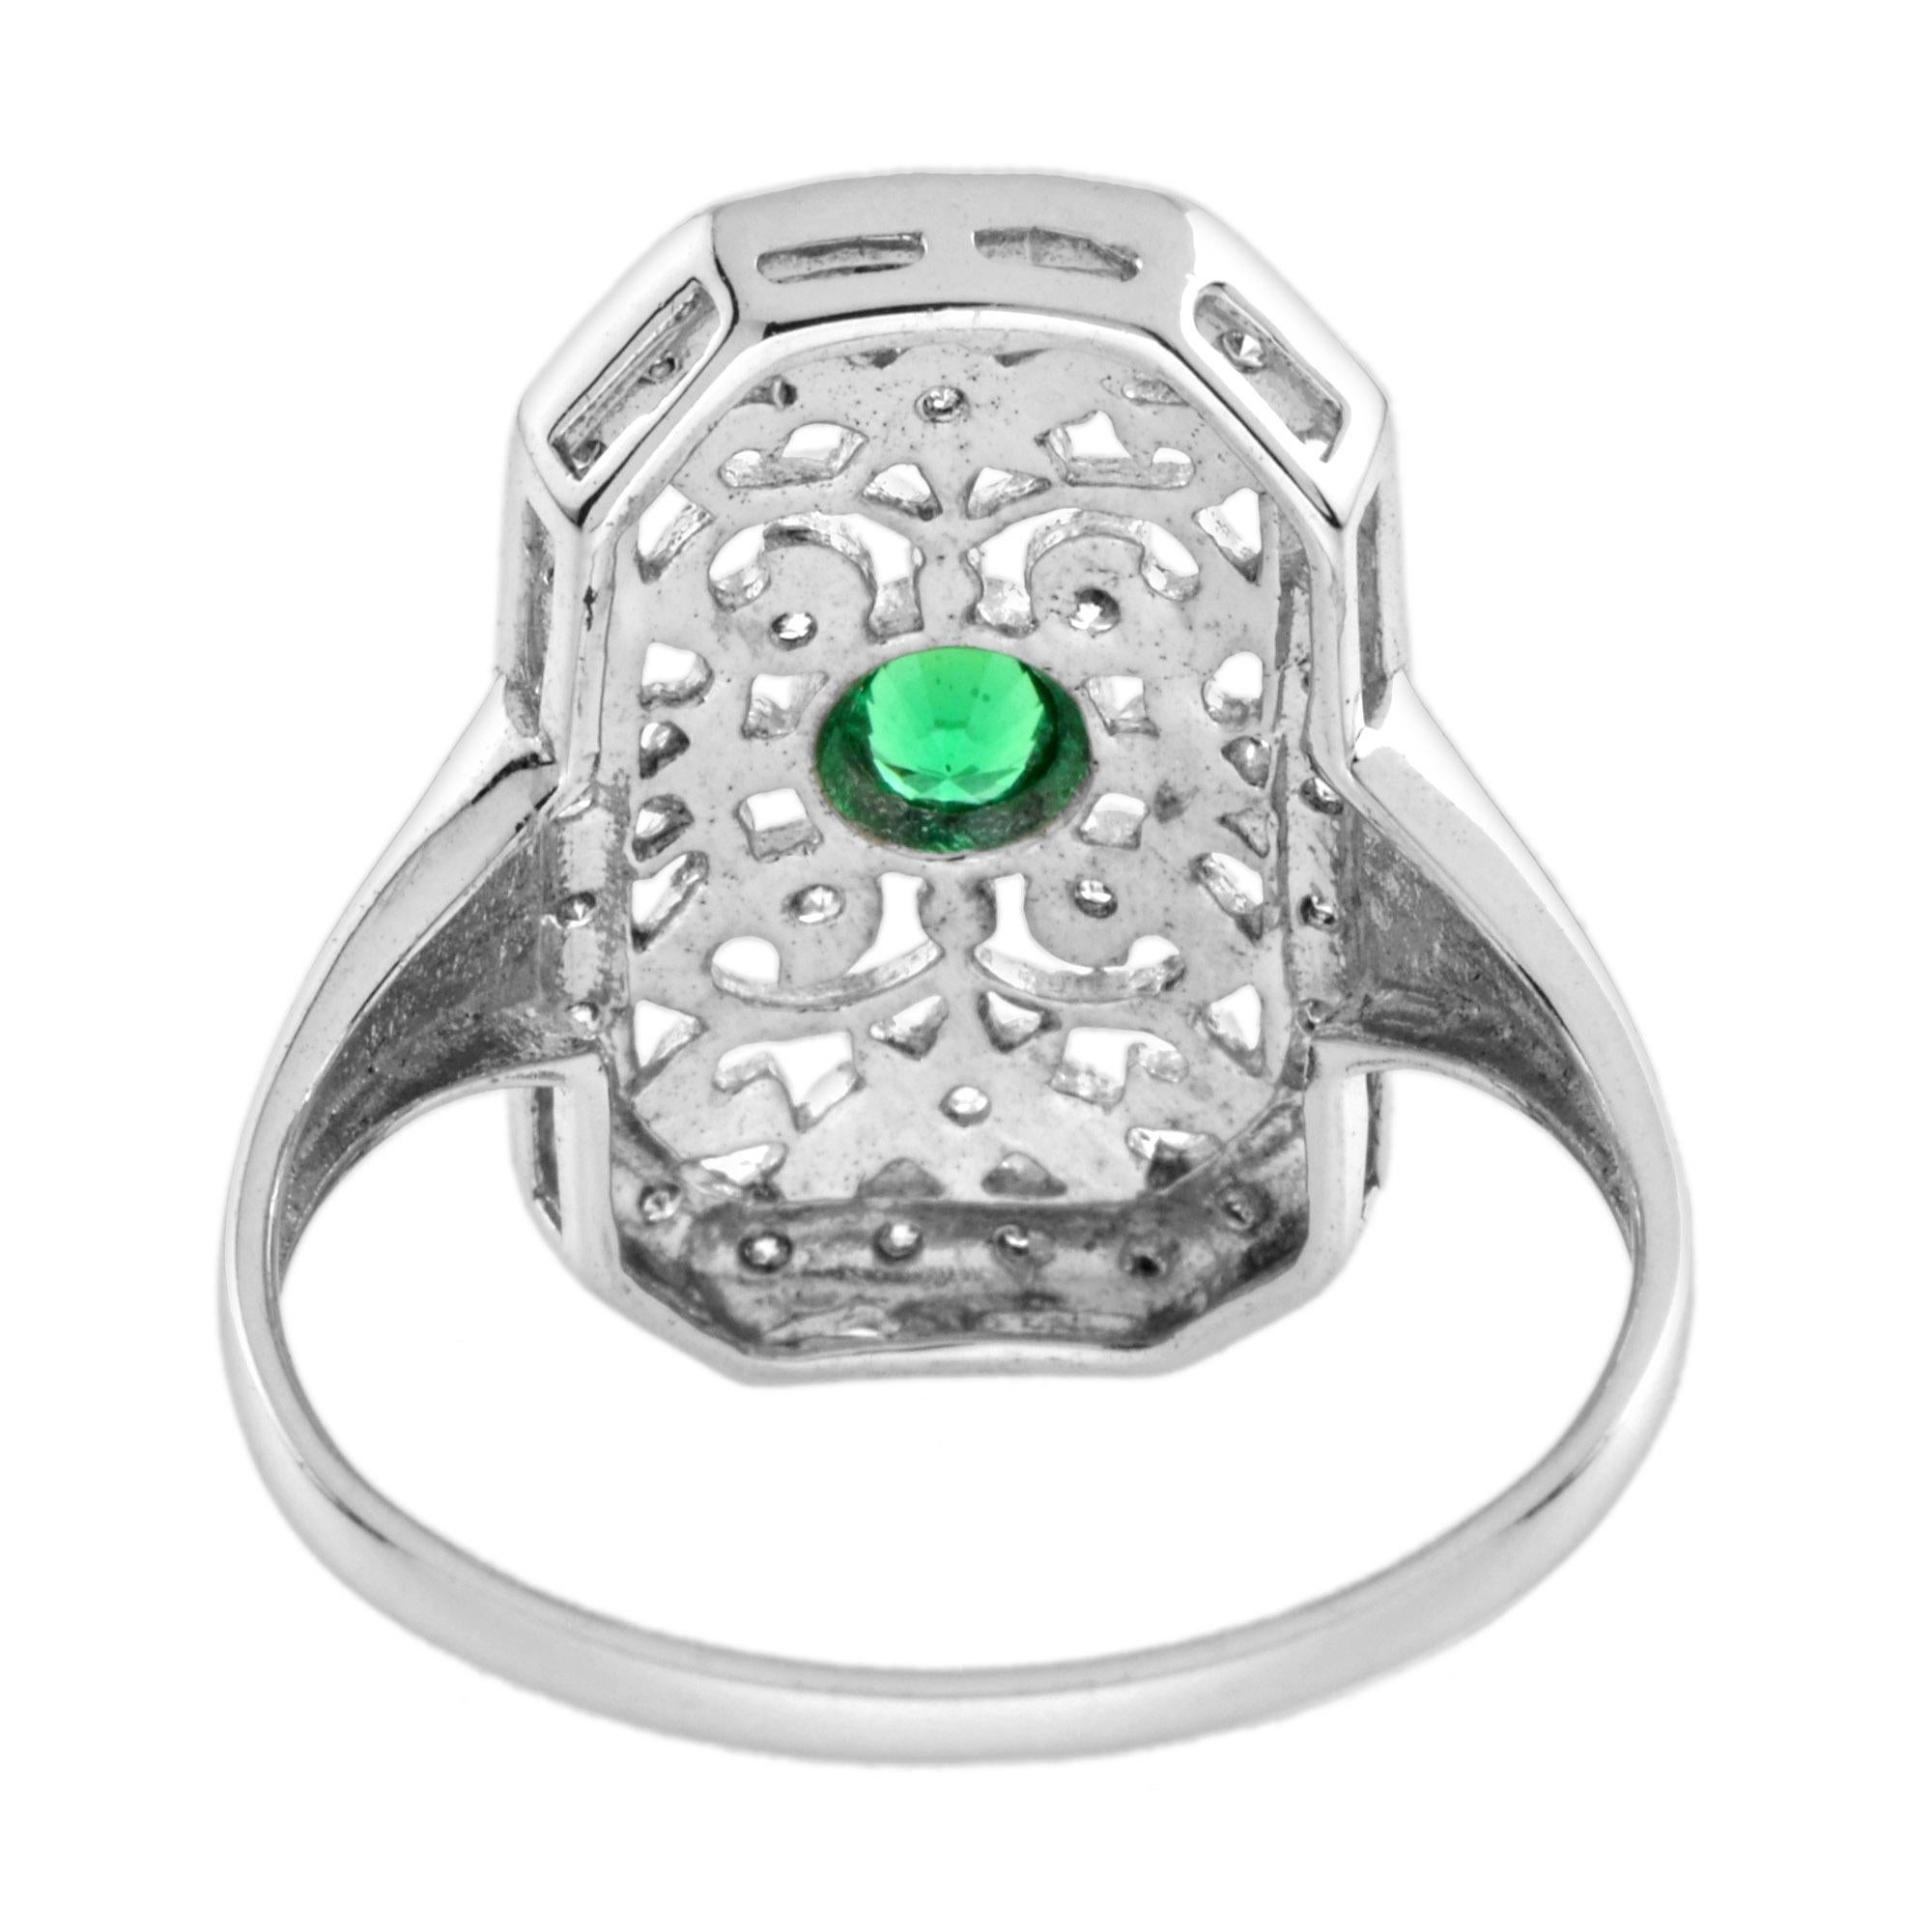 For Sale:  Emerald and Diamond Vintage Style Filigree Ring in 14K White Gold 4